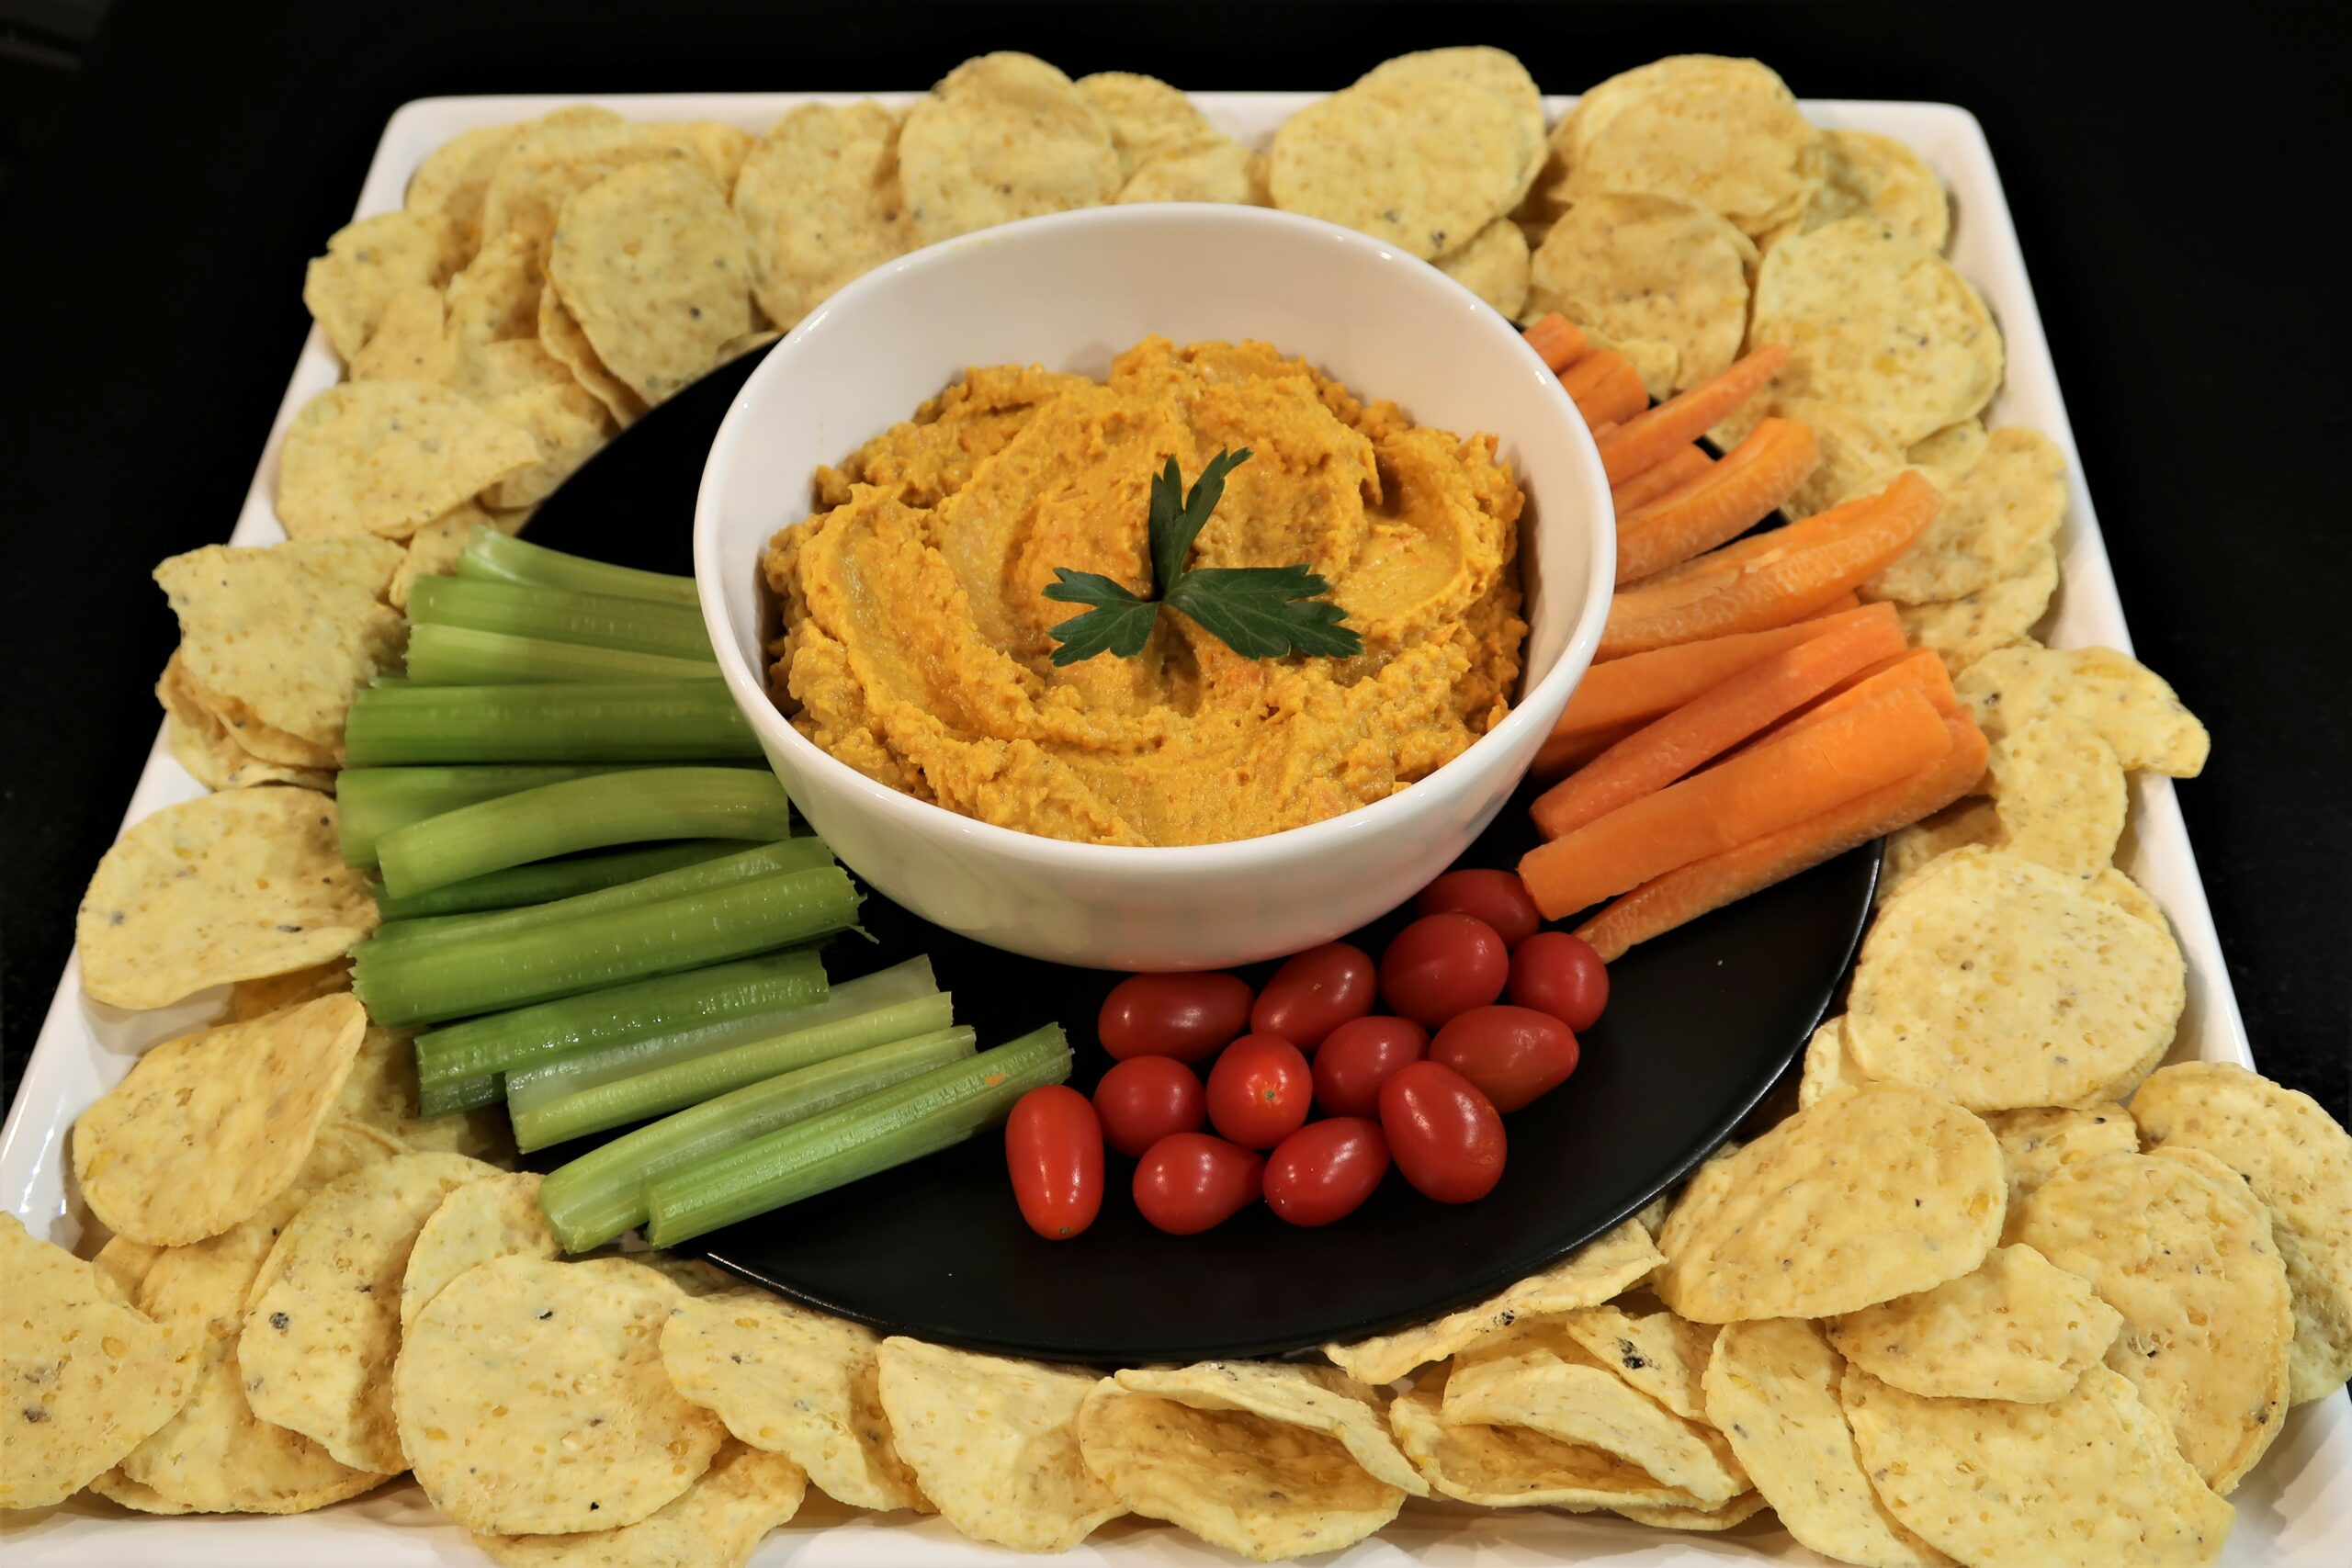 Harissa Spiced Carrot and Pepper Hummus